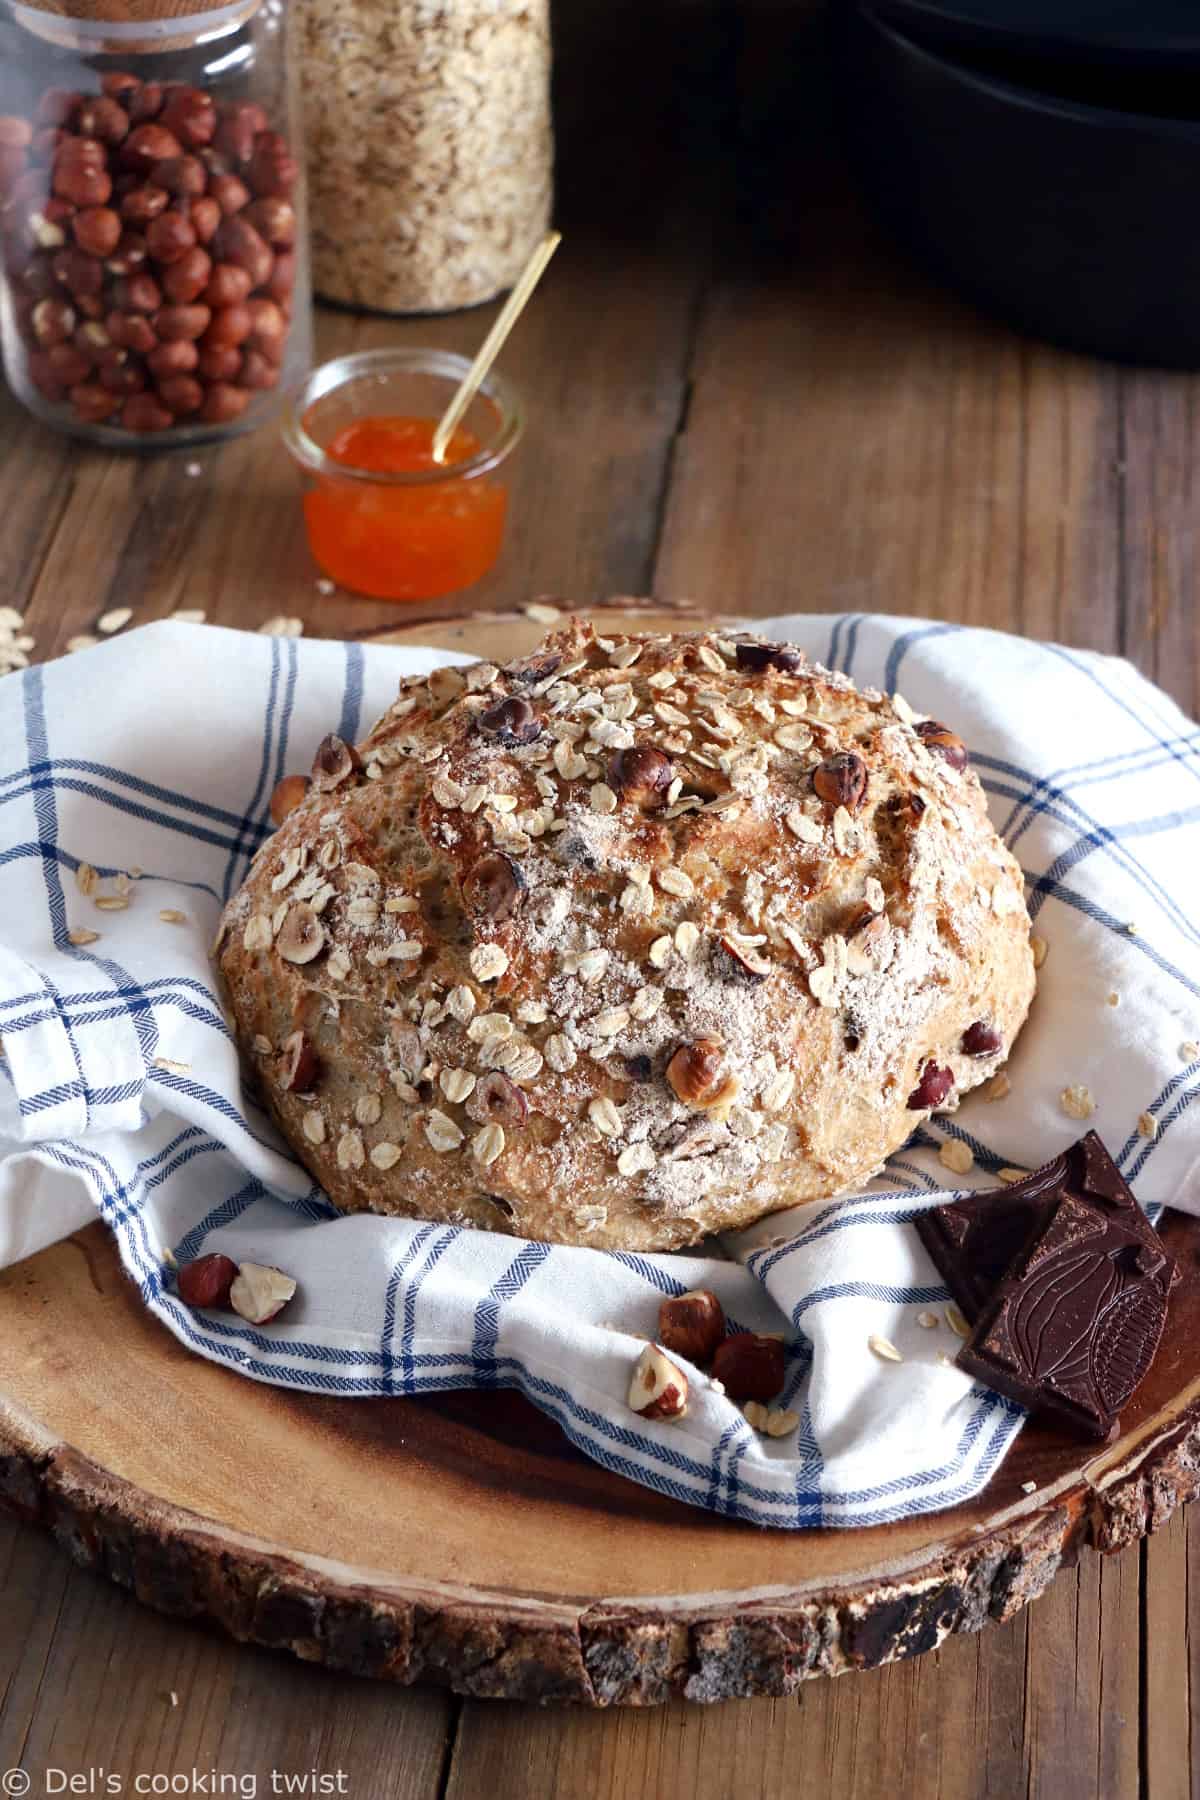 This no-knead hazelnut oat breakfast bread is a variation of the no-knead bread. With absolutely no effort, you get a perfect artisan bread every time you make it.